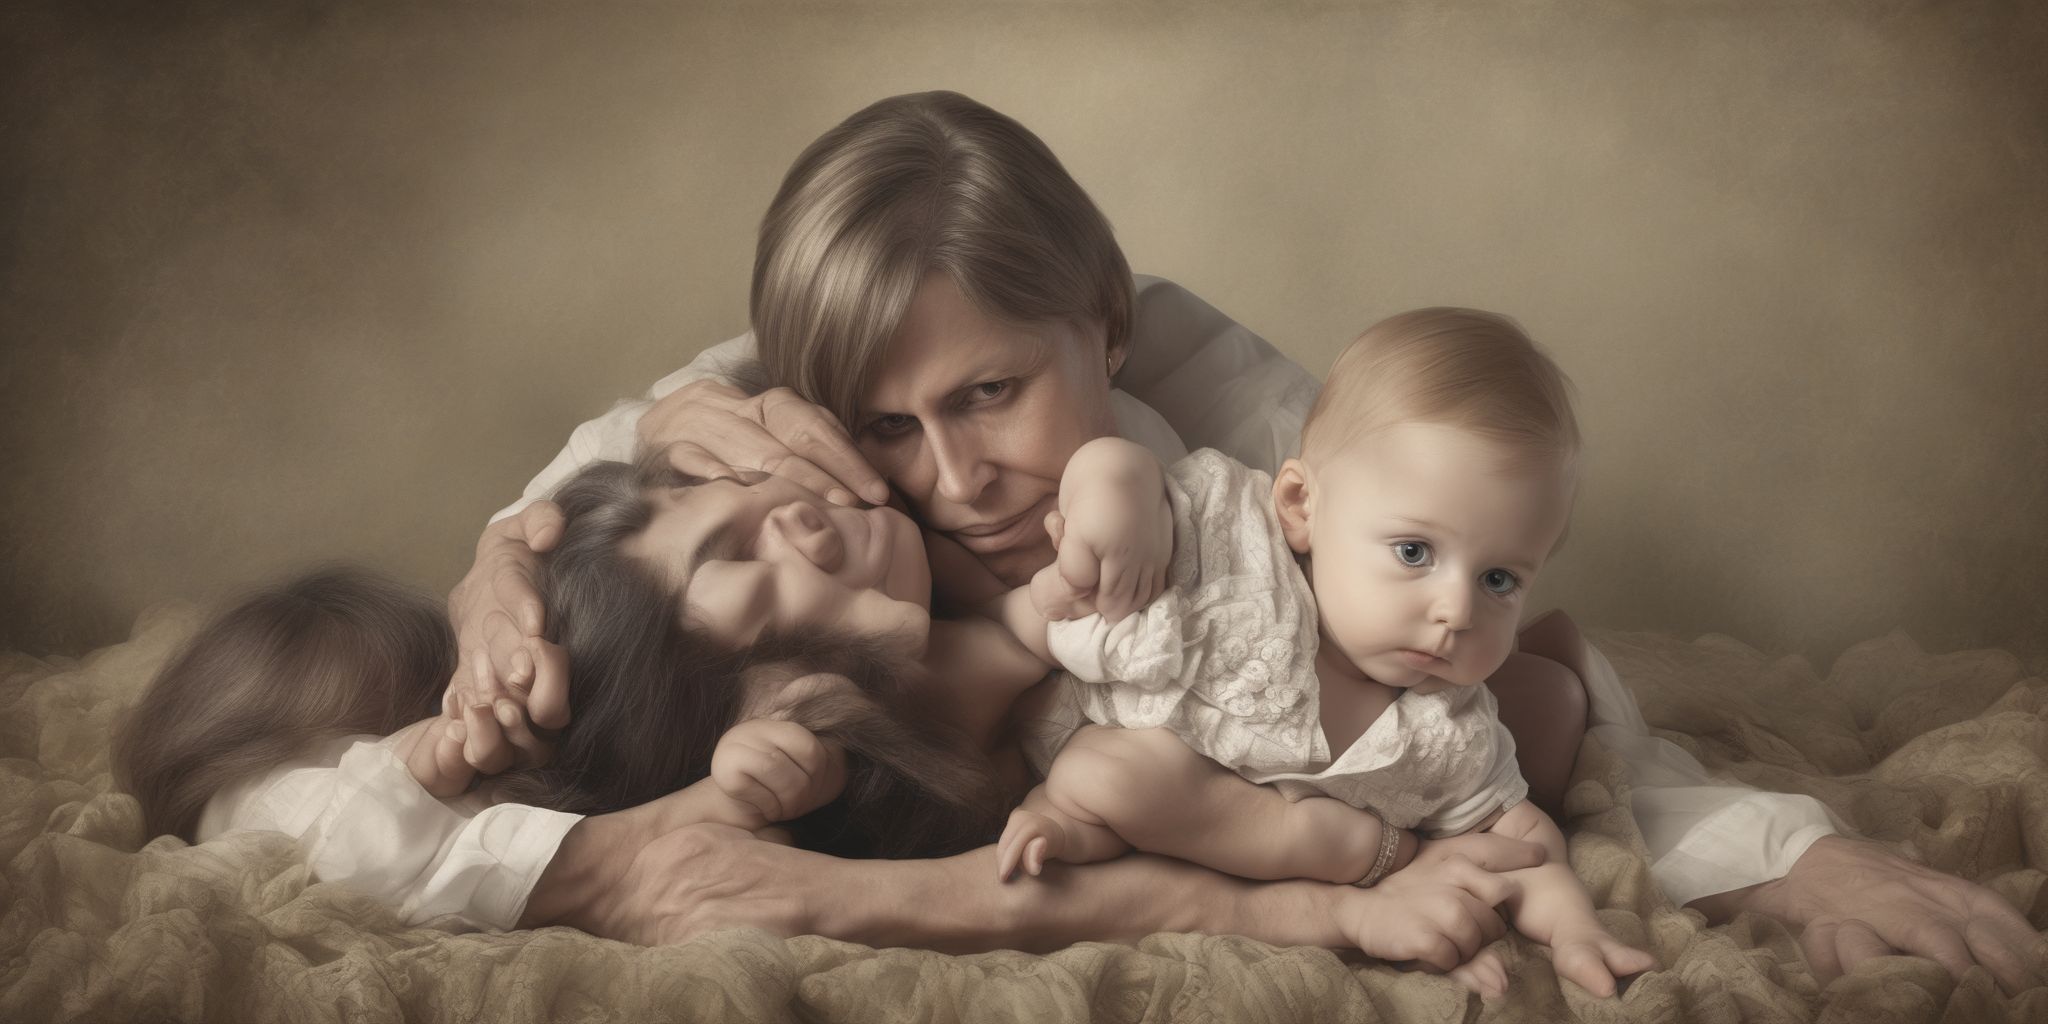 Inheritance  in realistic, photographic style